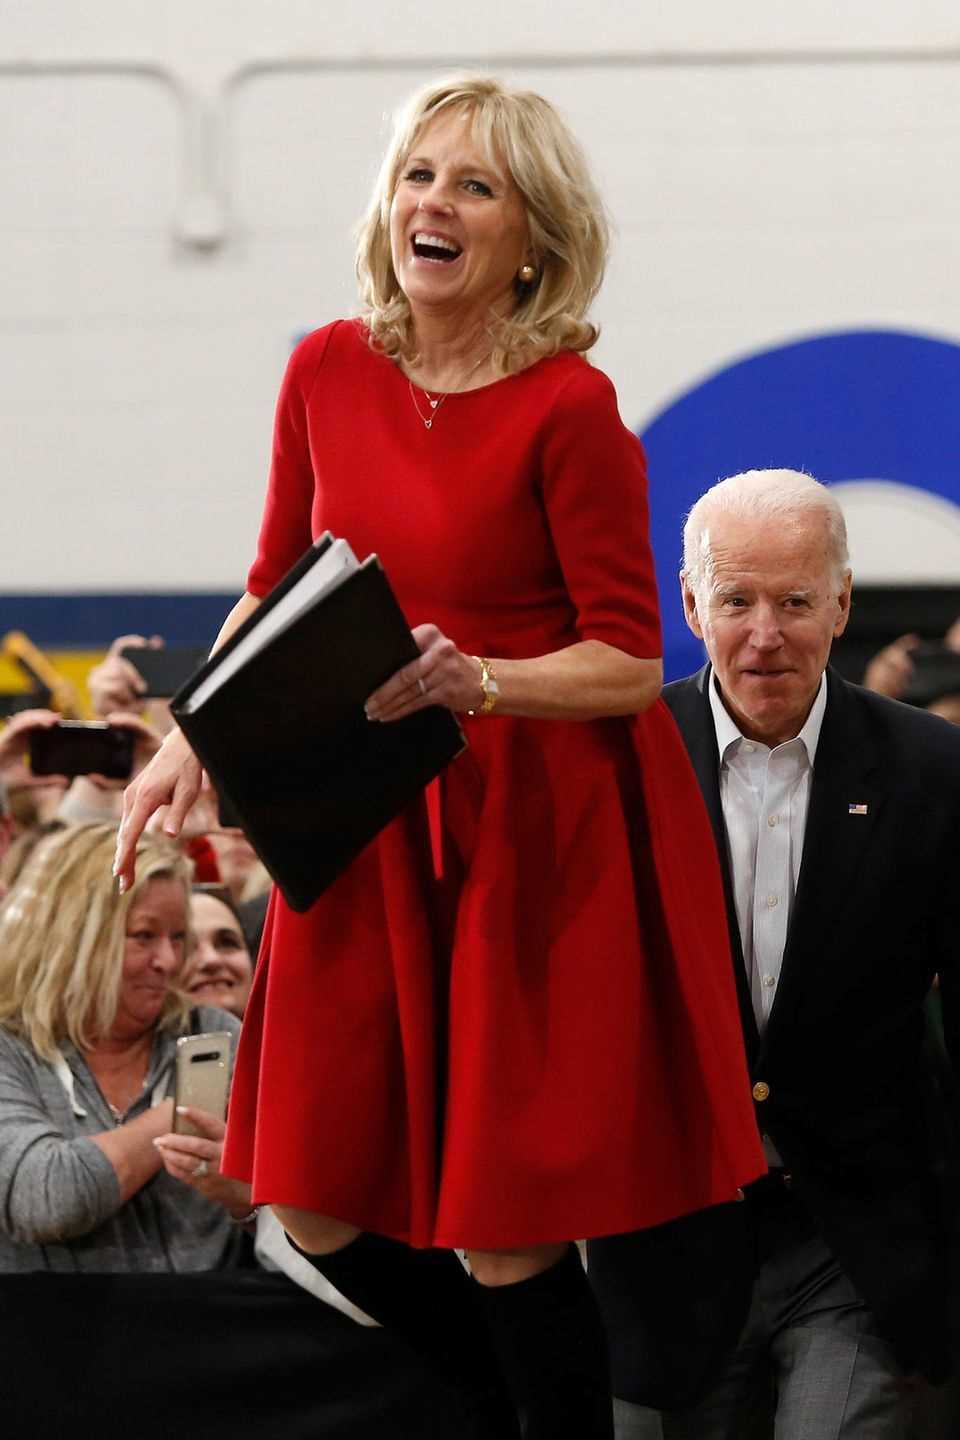 The red bell-skirt dress that Jill Biden wears to a campaign rally in Des Moines not only puts her in a good mood.